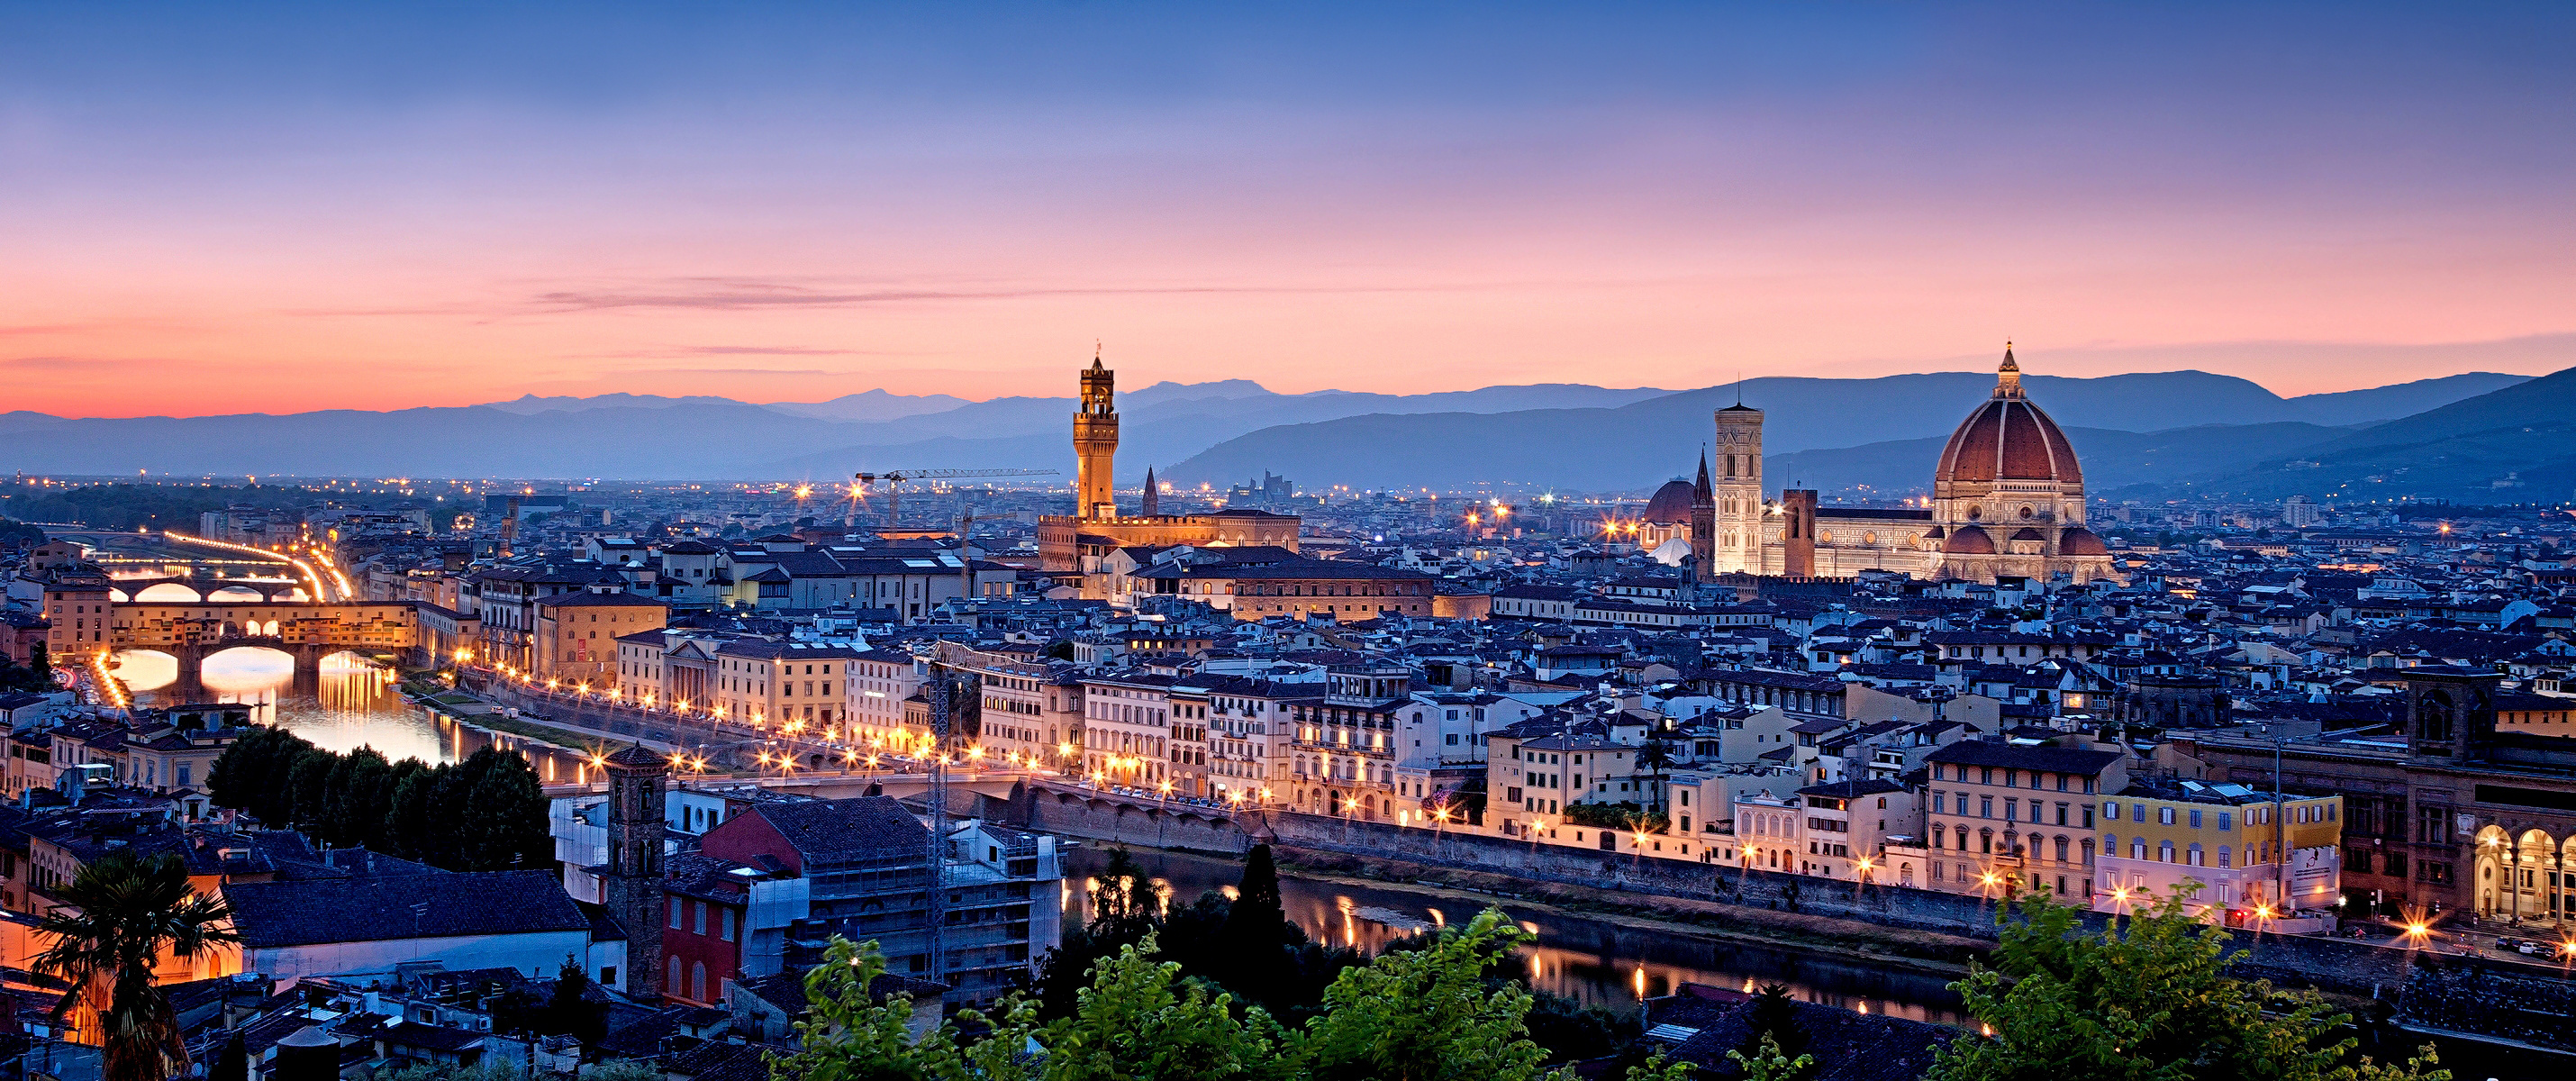 Florence  Italy 1080P 2K 4K 5K HD wallpapers free download  Wallpaper  Flare